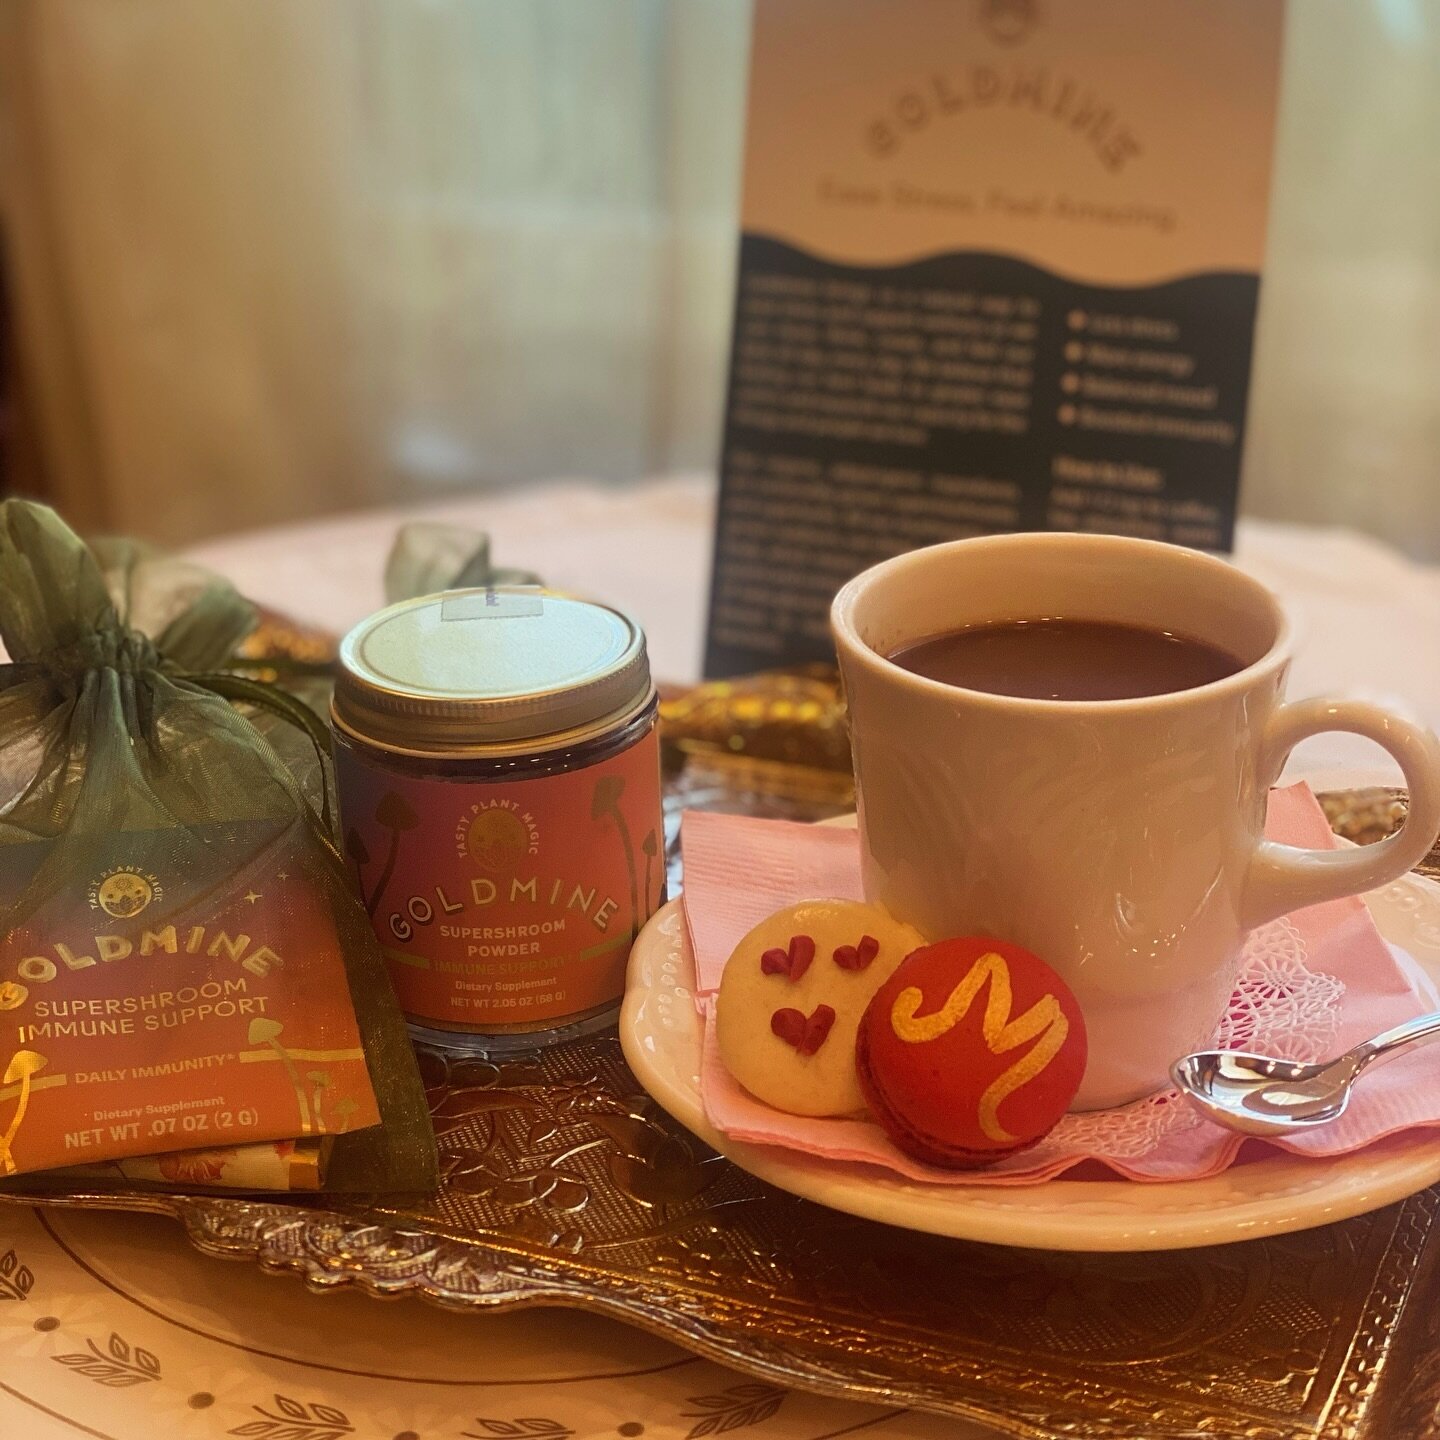 💖&hearts;️ FEBRUARY SPECIALS 💖&hearts;️

Enjoy @drinkgoldmine adaptogenic hot chocolate following your Sugar &amp; Spice (120 minute facial and massage combo) or Old Fashioned Honeymoon (60 minute couples massage) this month! 

This nourishing, org